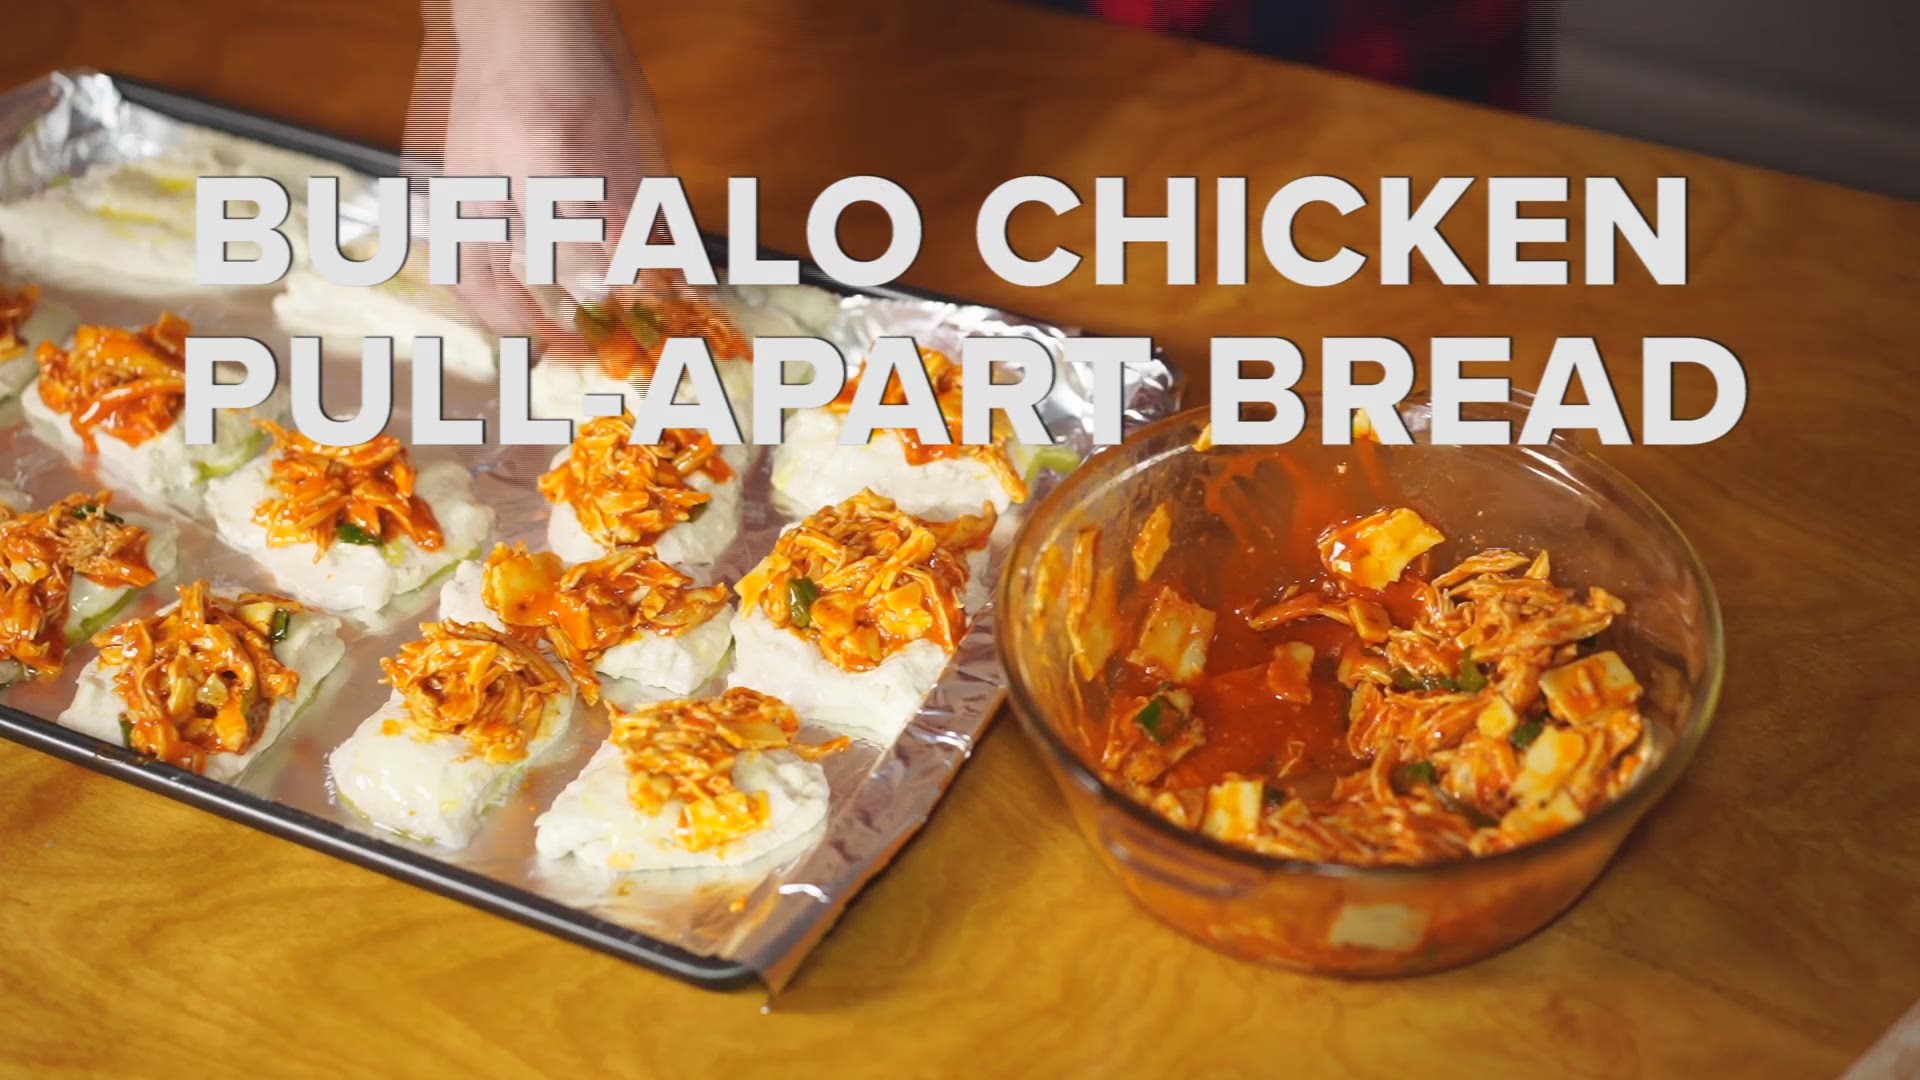 How to make Buffalo Chicken Pull-apart Bread.